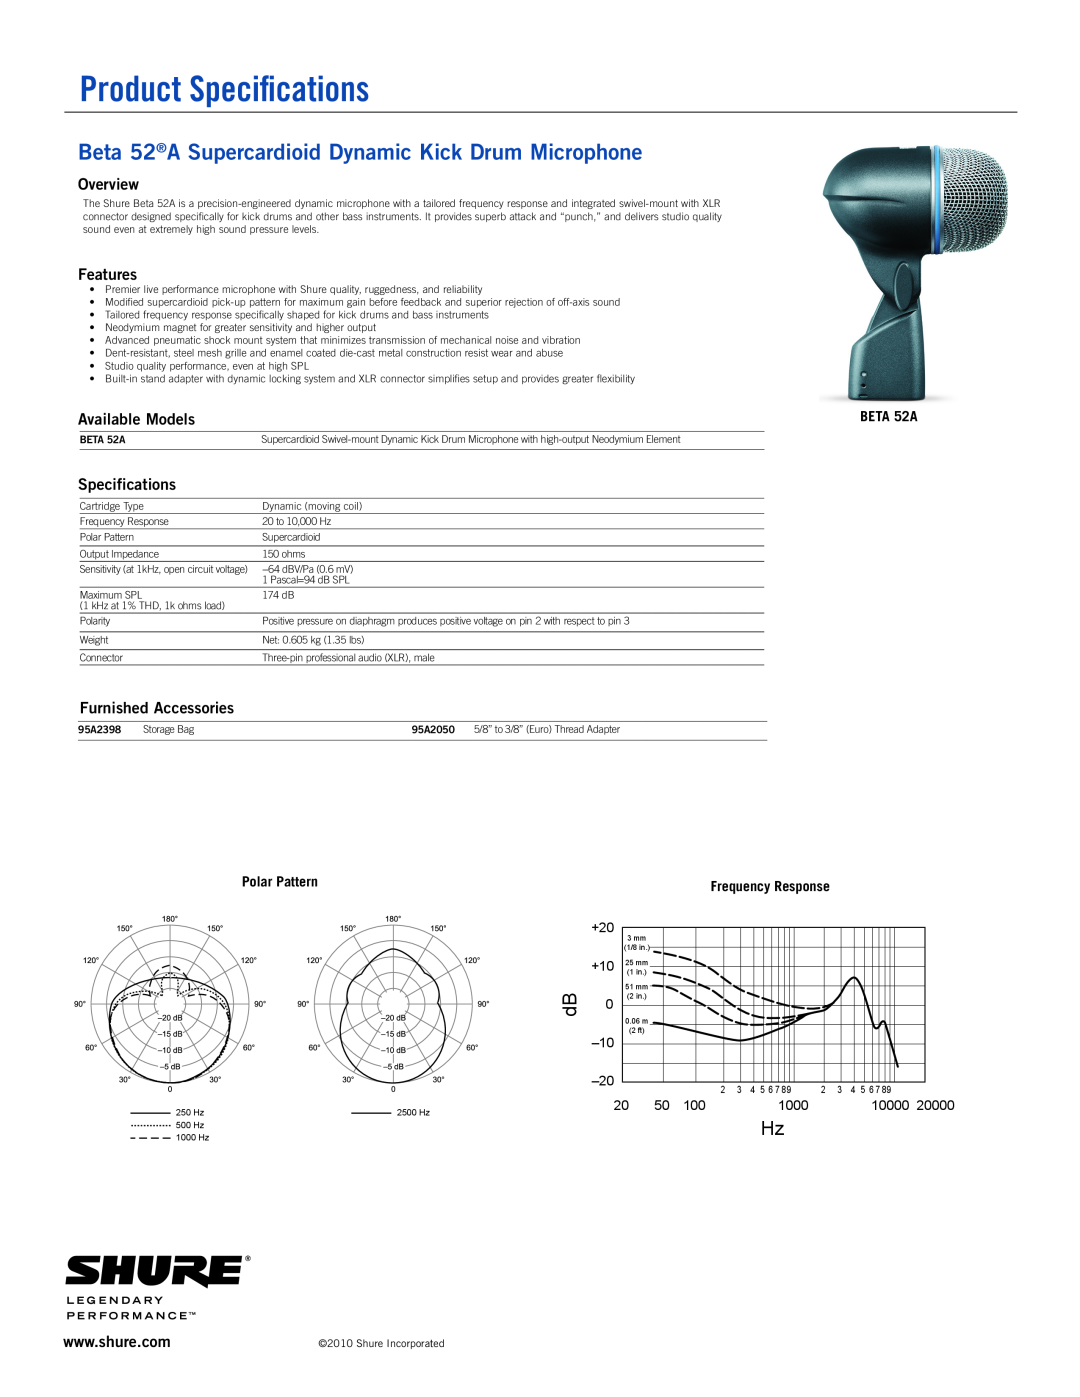 Shure specifications Product Specifications, Beta 52A Supercardioid Dynamic Kick Drum Microphone, Overview, Features 